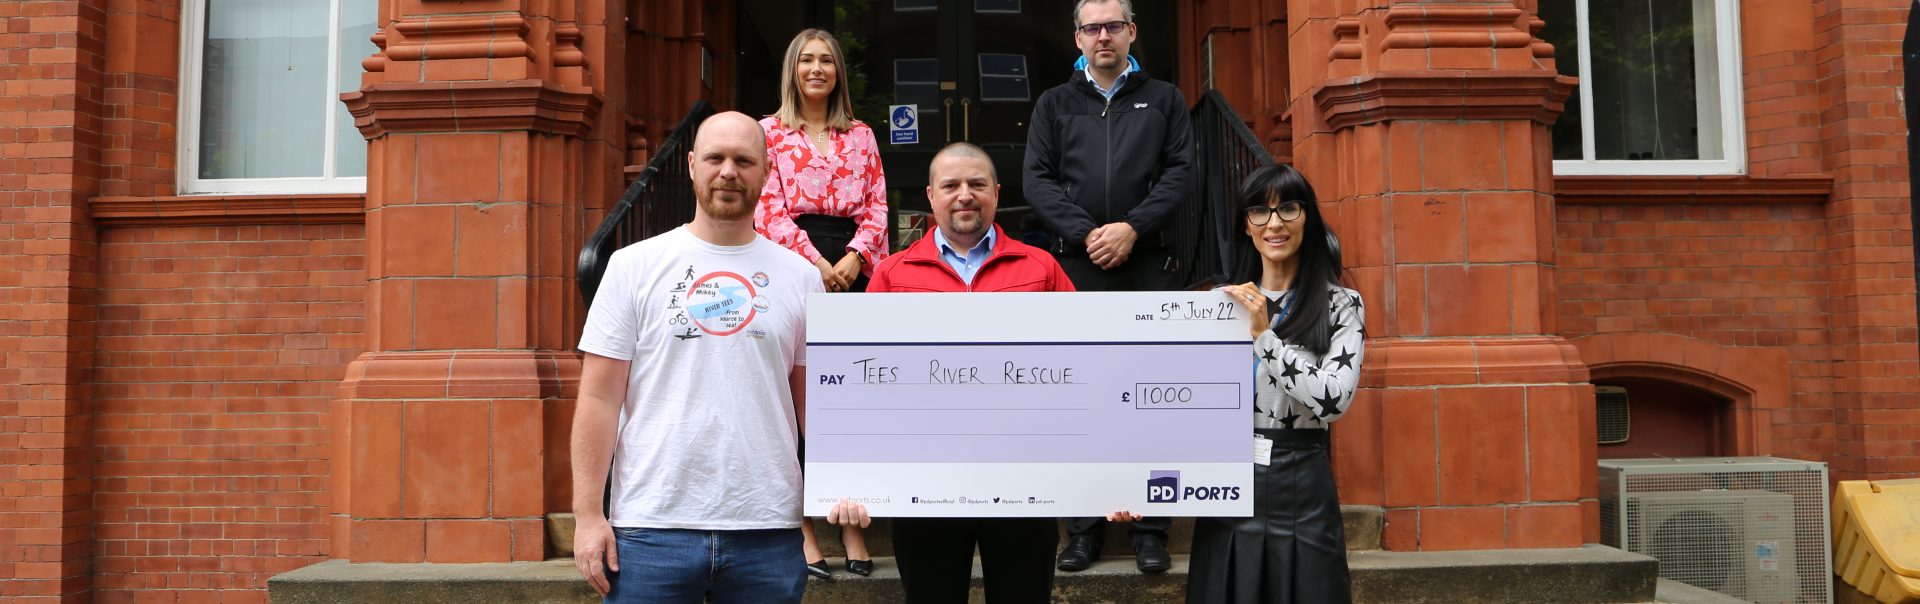 PD Ports donates £1000 to support Tees River Rescue Fundraiser